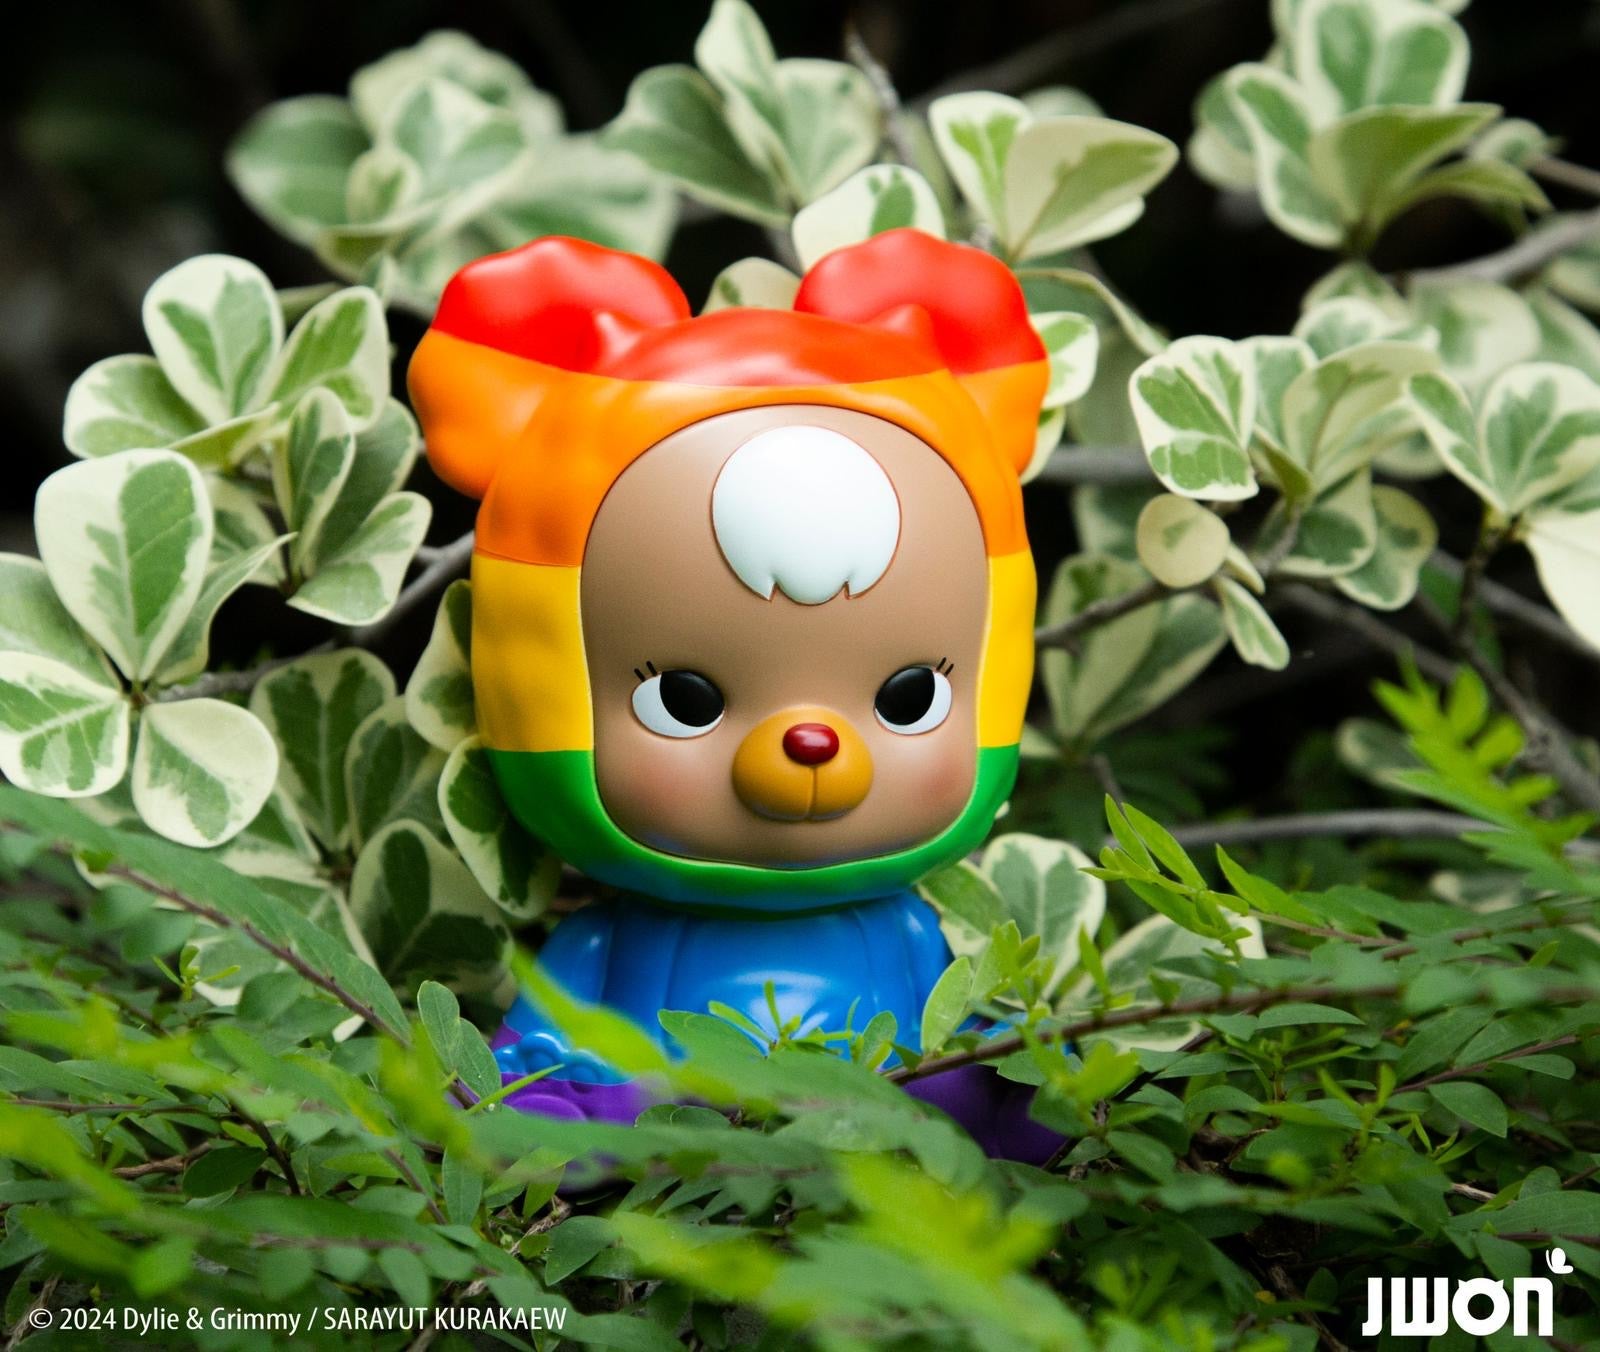 Alt text: Jrbo Rainbow Edition by JWON, a 10cm resin toy bear figurine, nestled among bushes. Preorder, ships July 2024.